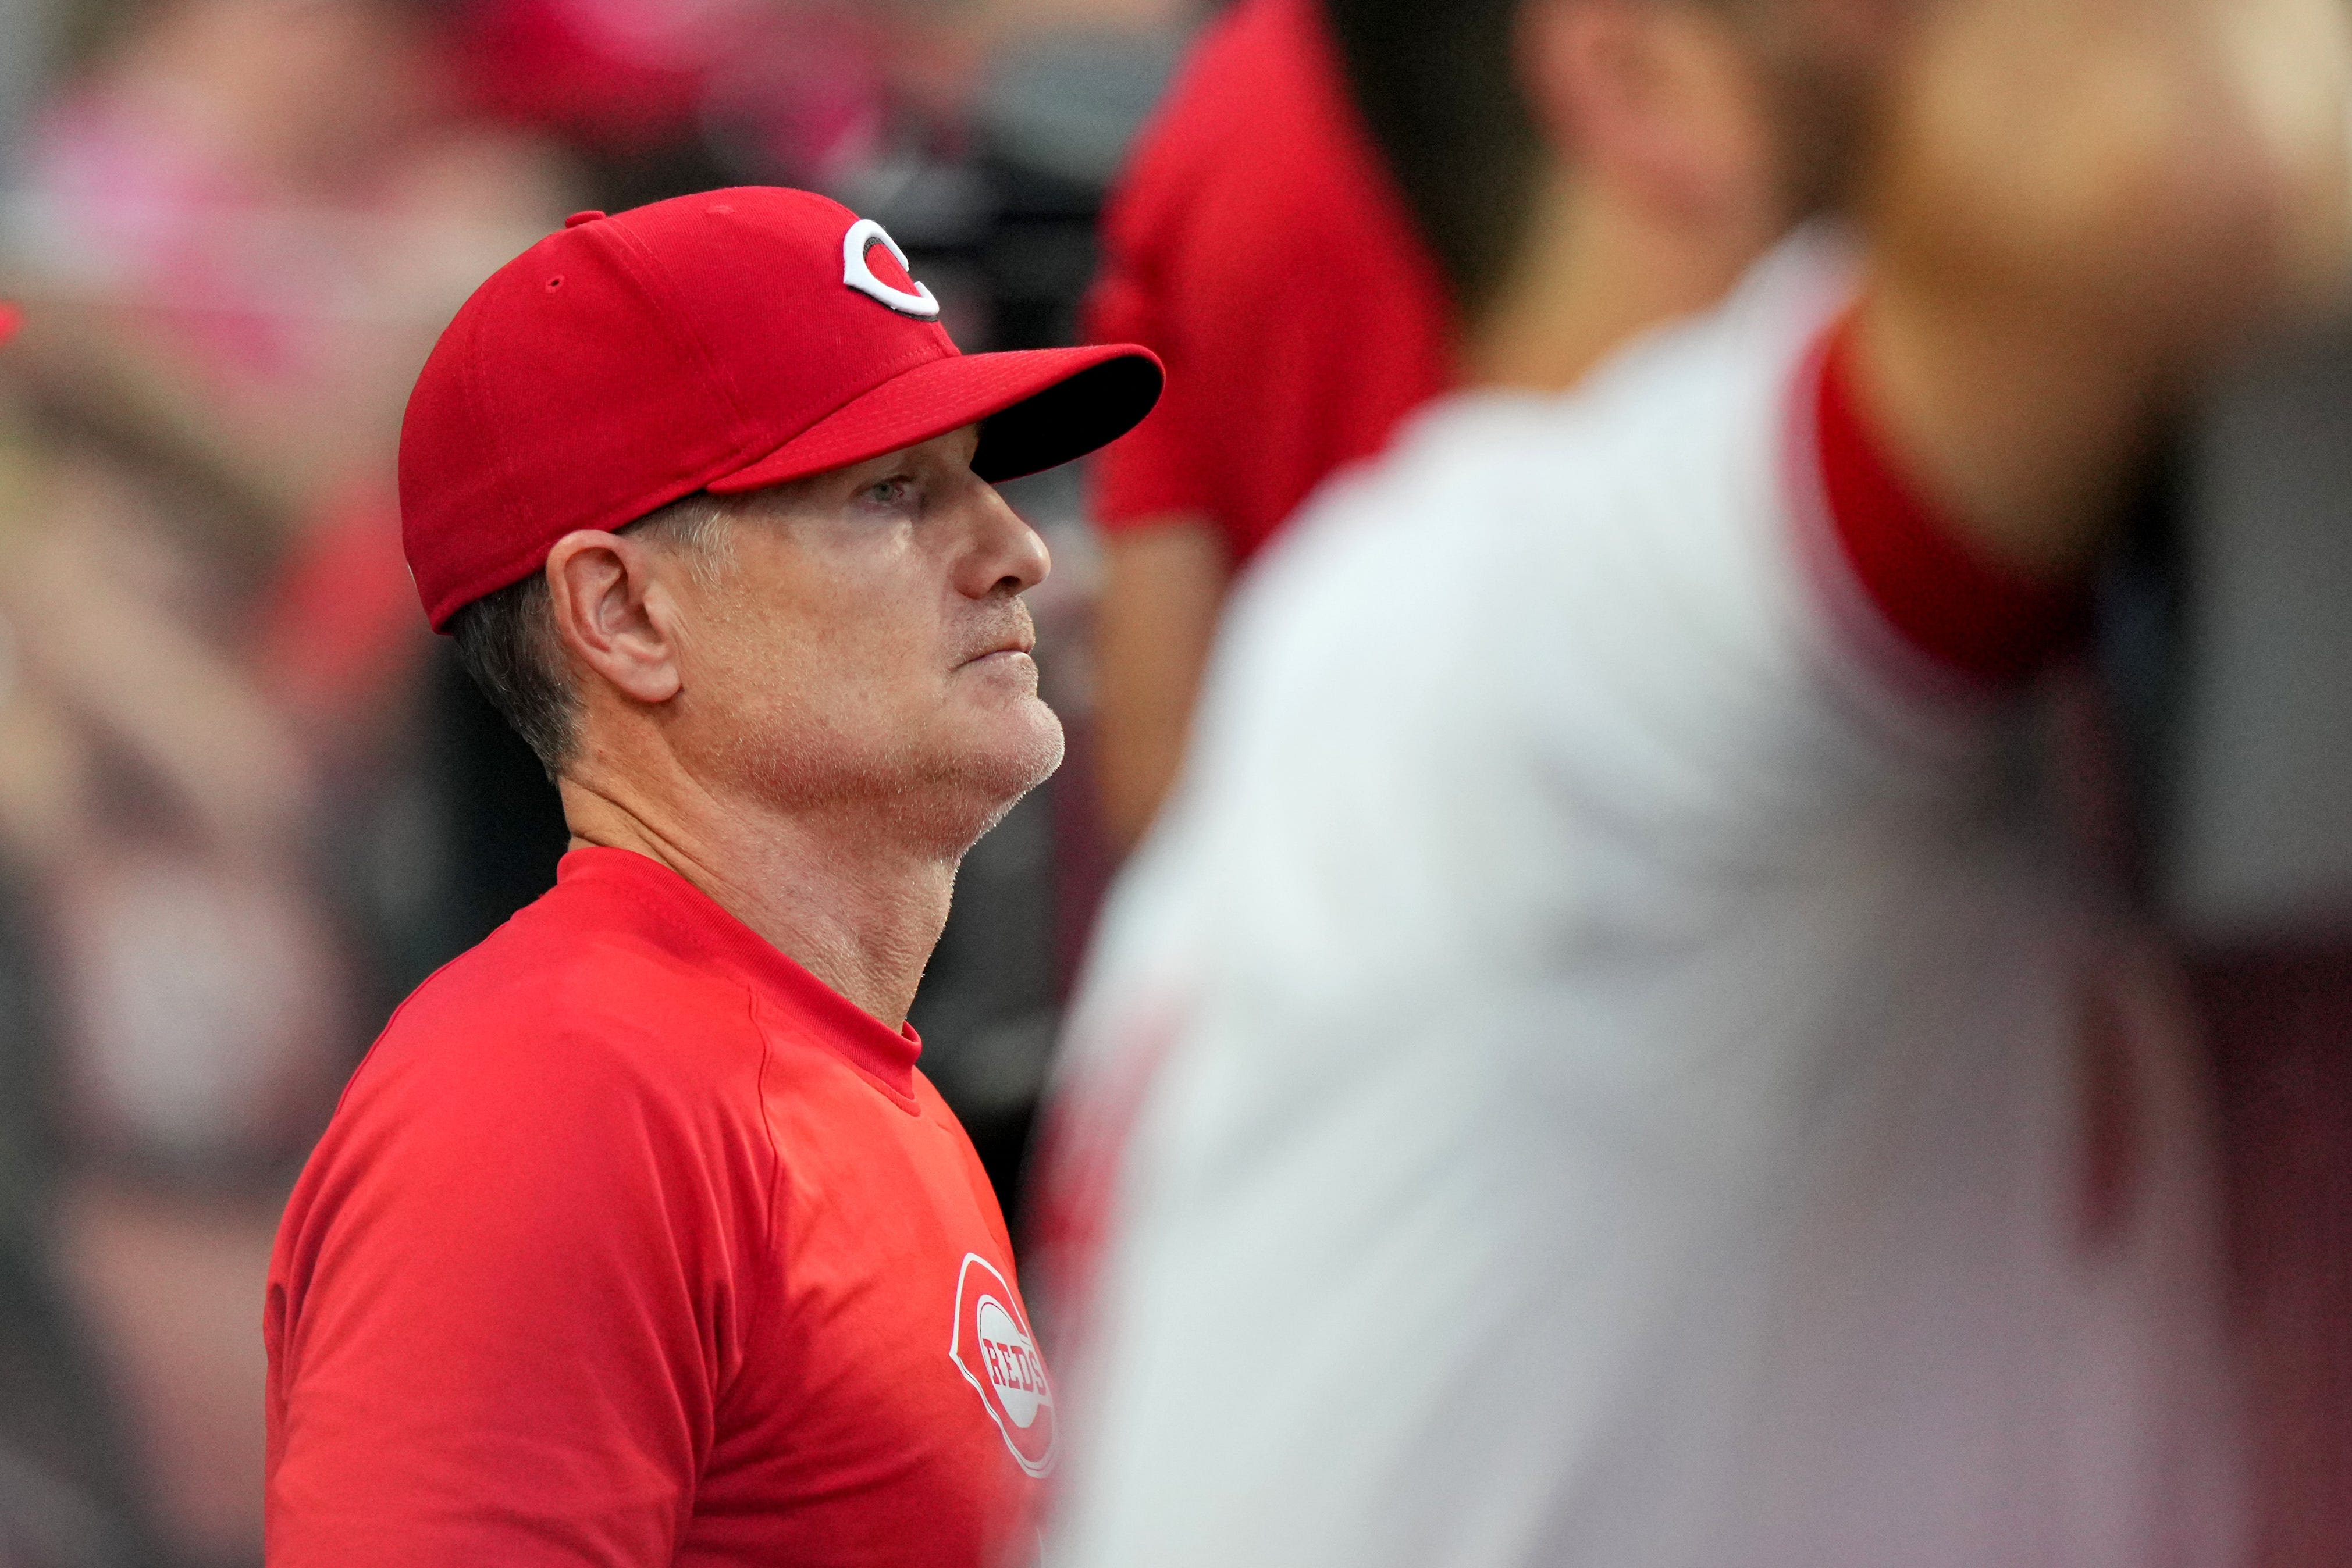 Sam LeCure: David Bell's chair throw must be some frustration about Cincinnati Reds' play